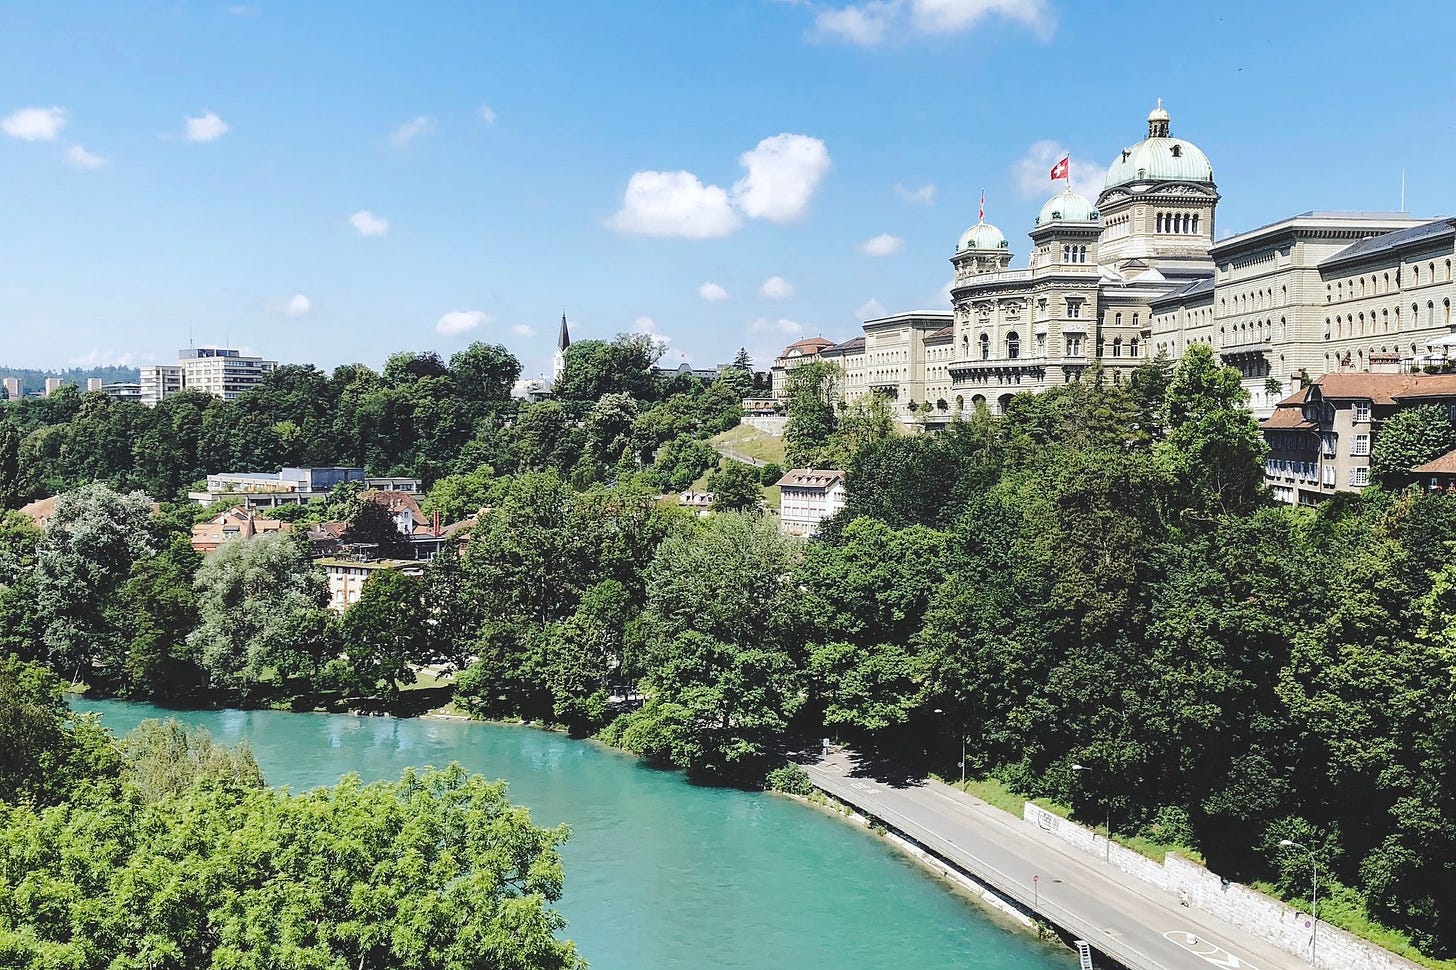 This is what it sounds like in Switzerland's capital, Bern